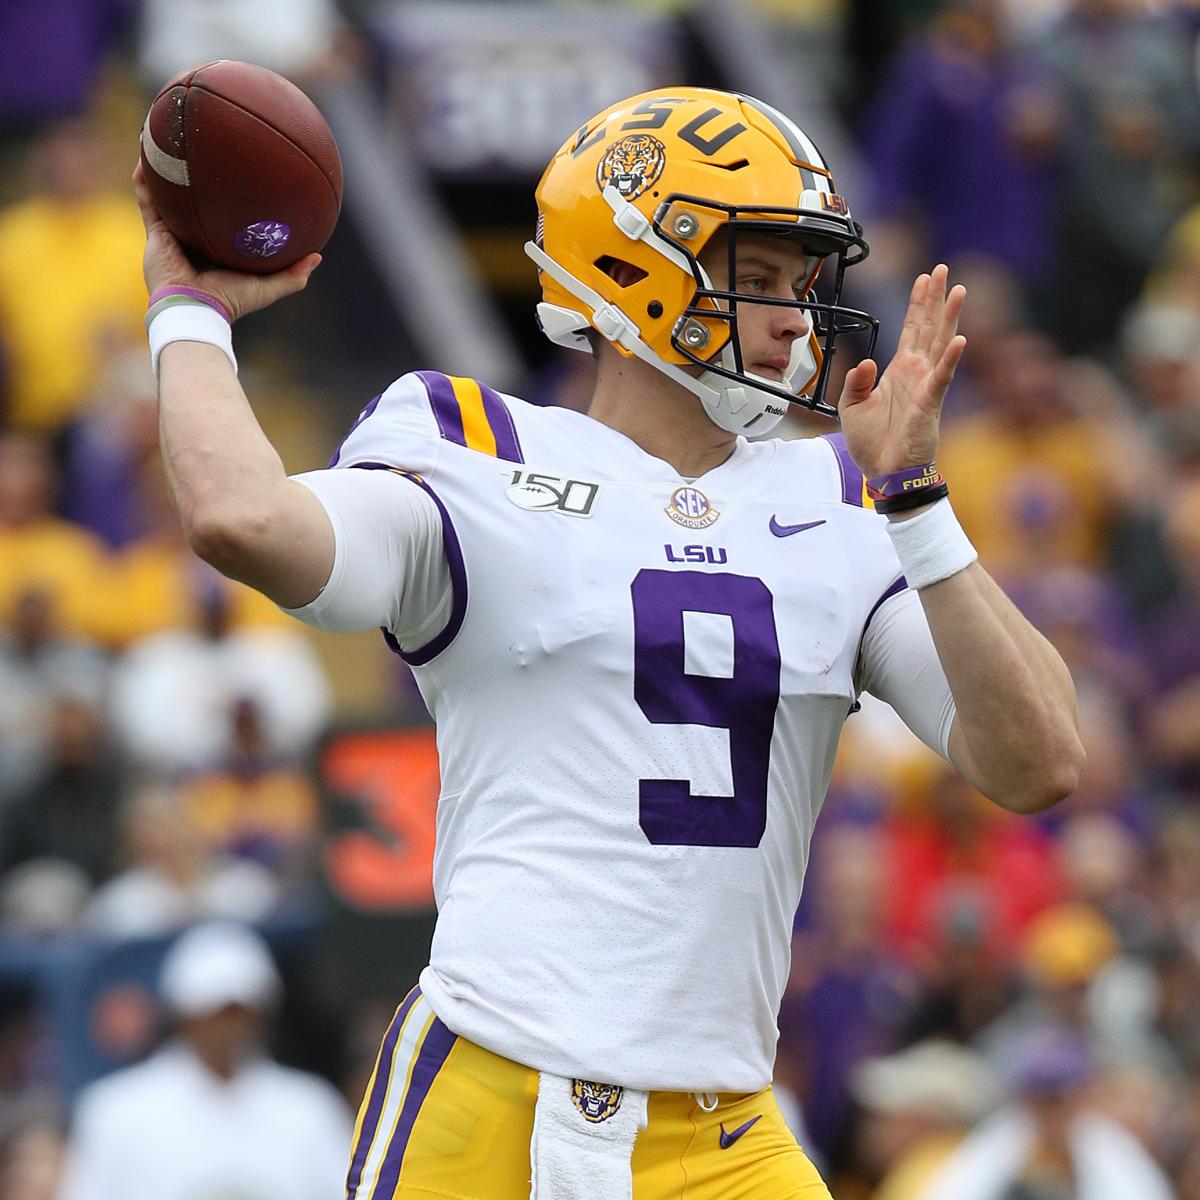 College Football Rankings 2019: Latest Standings and Predictions for